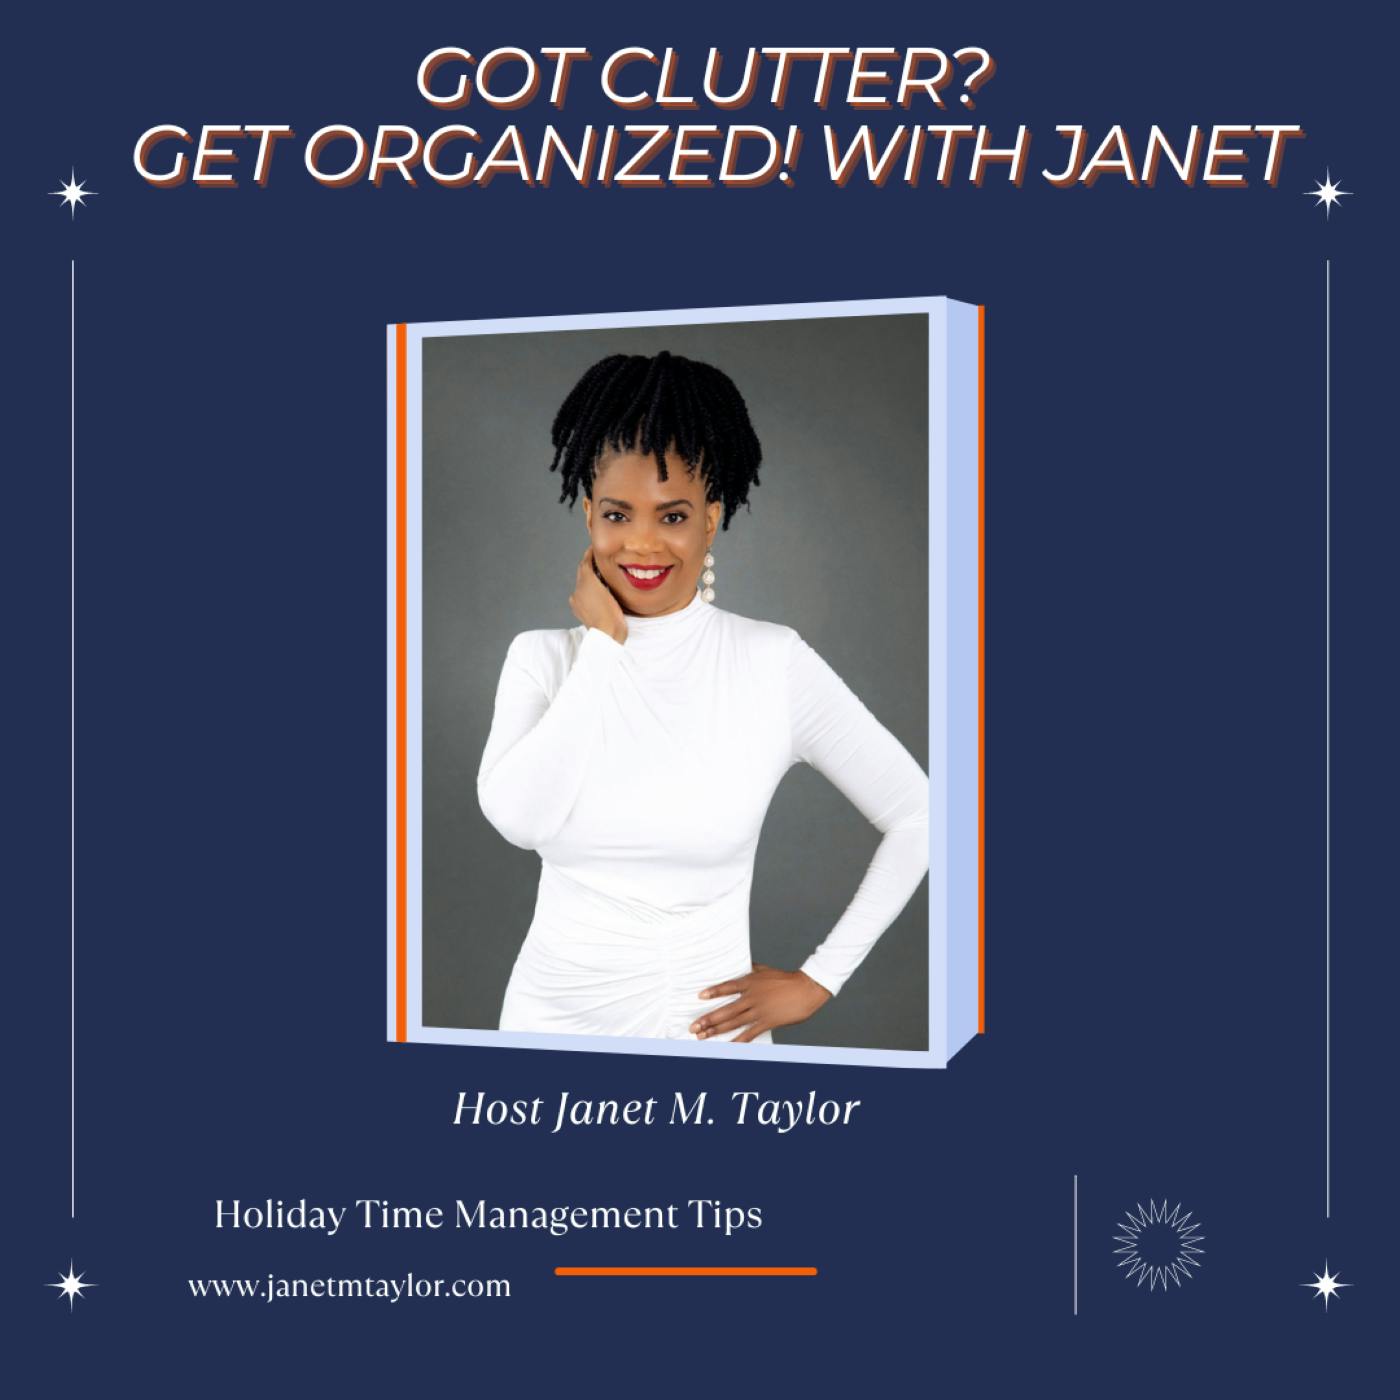 Holiday Time Management Tips with Janet